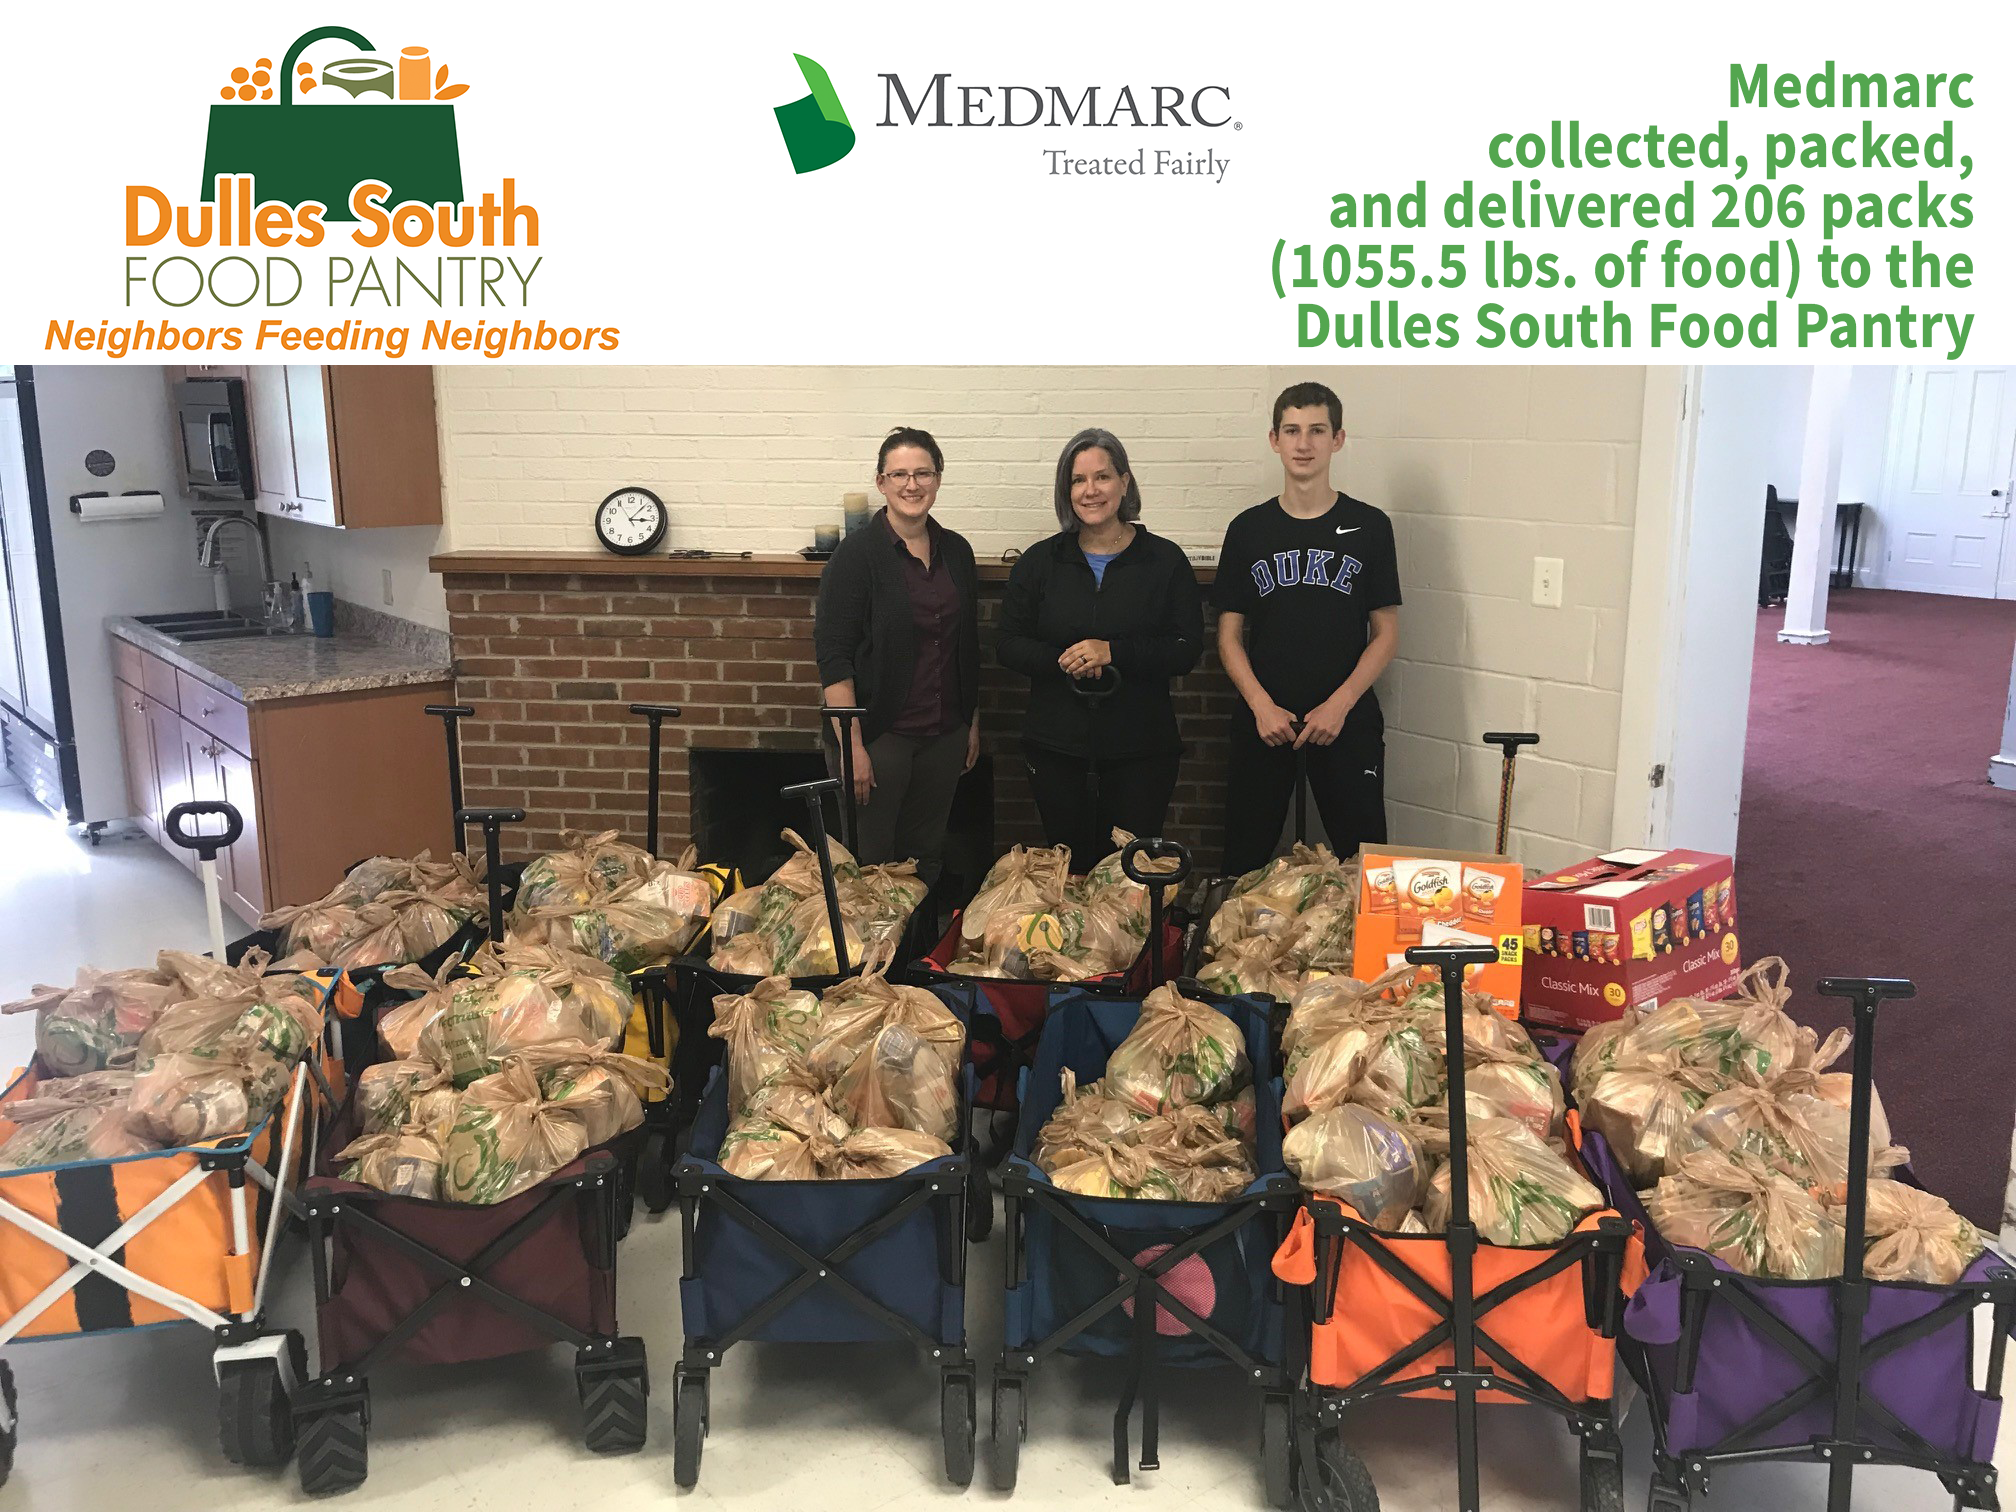 Members of the MedMarc team in Chantilly, VA delivered 206 packs of food to the Dulles South Food Pantry.  